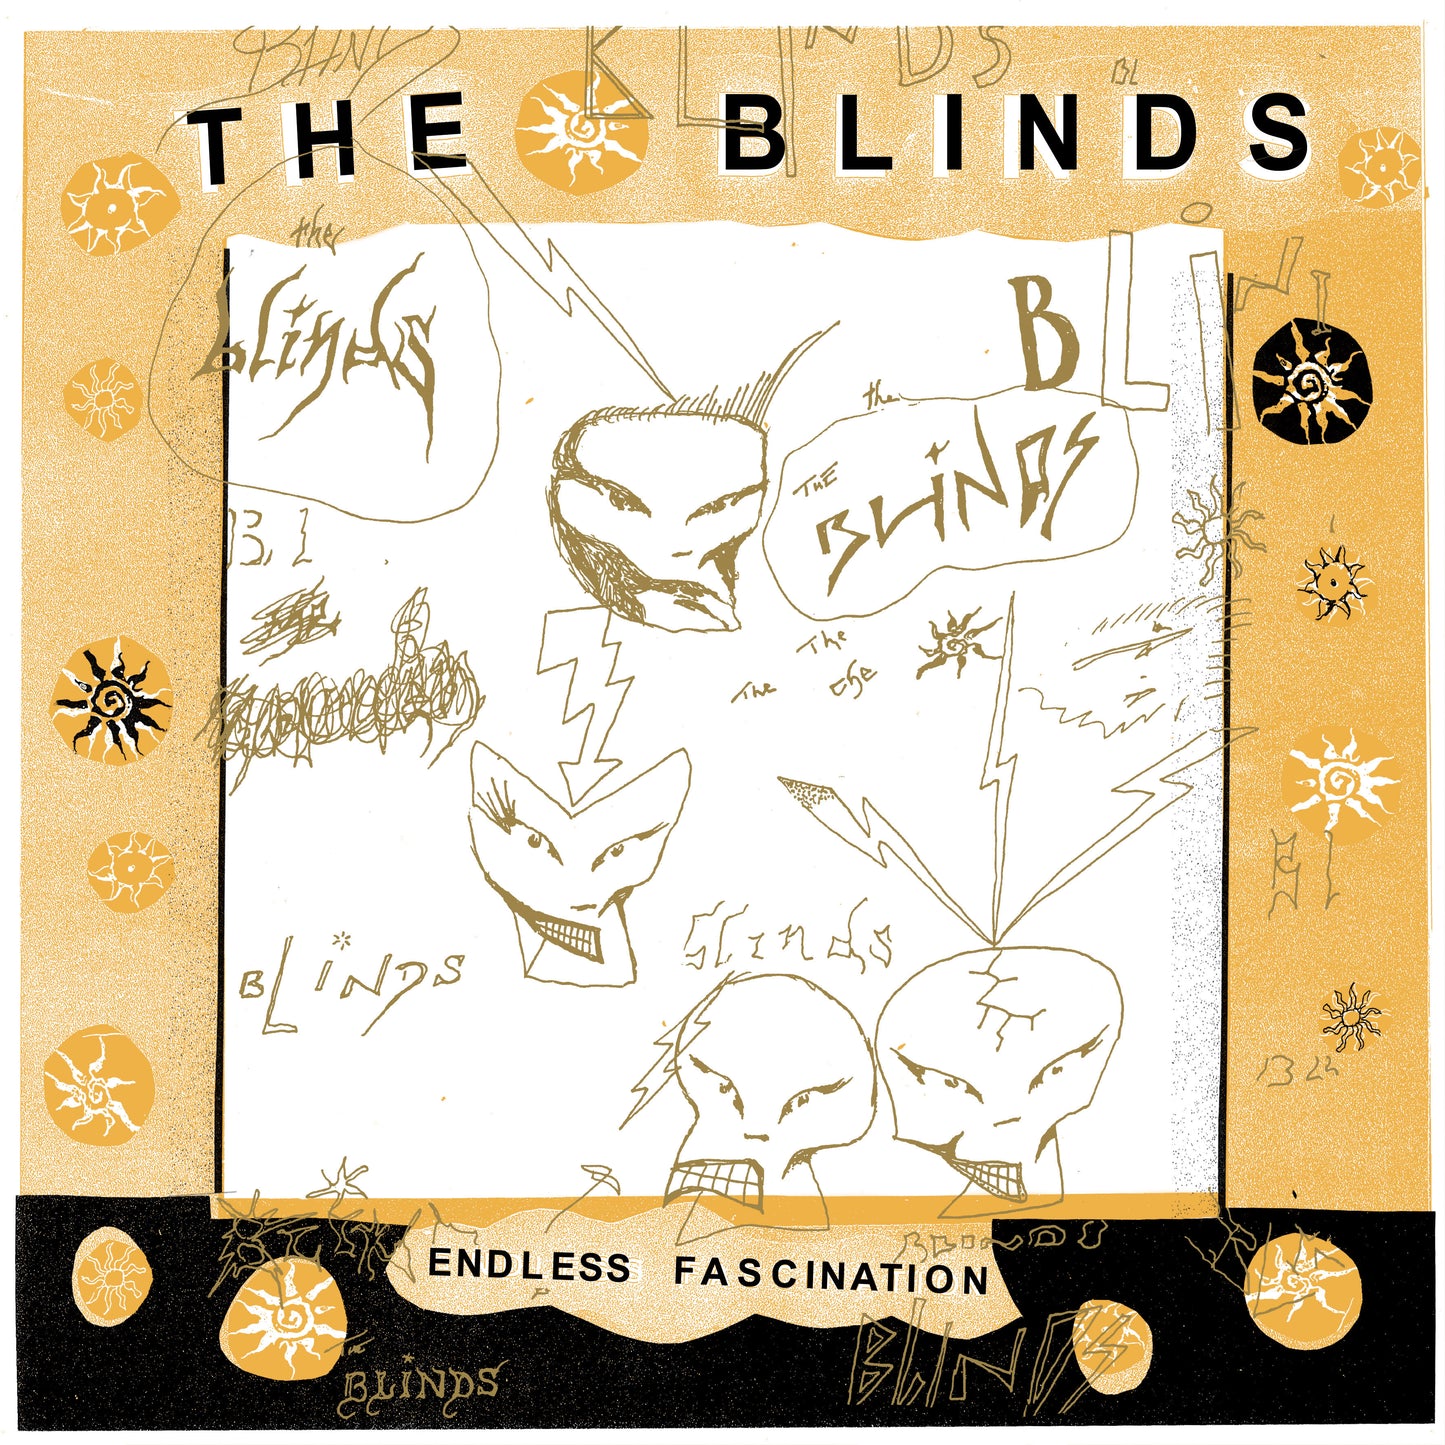 THE BLINDS - "ENDLESS FASCINATION" 7"